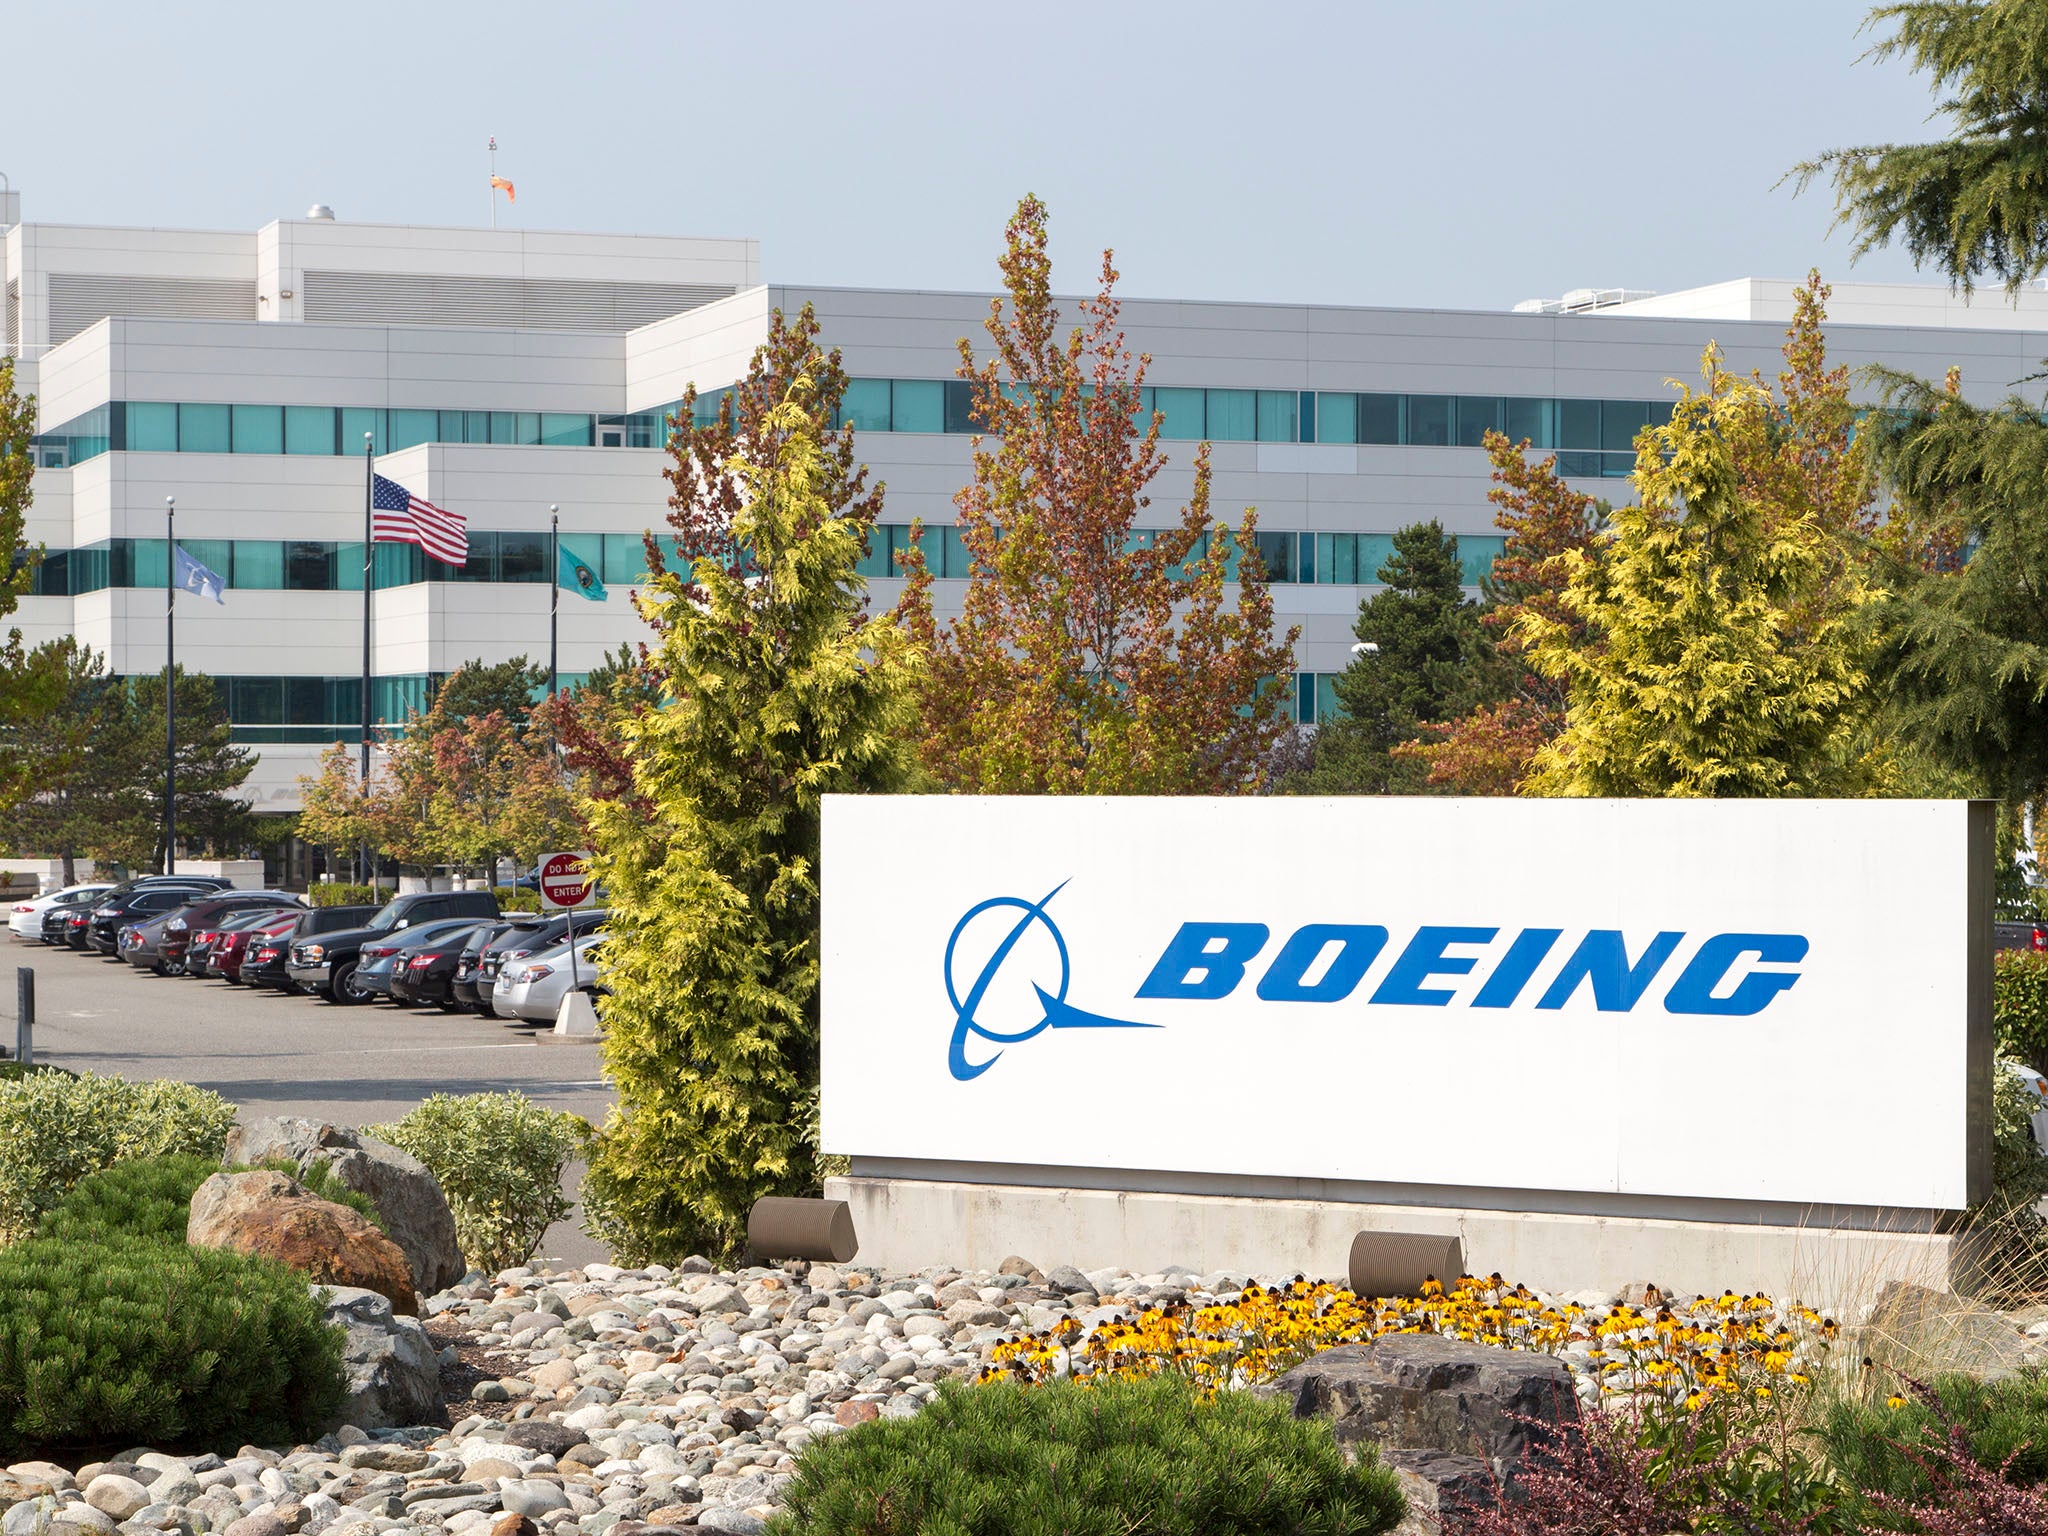 Boeing denies Curtis Anthony’s claims that he was victim to targeted racial harassment while working at its Charleston plant in South Carolina